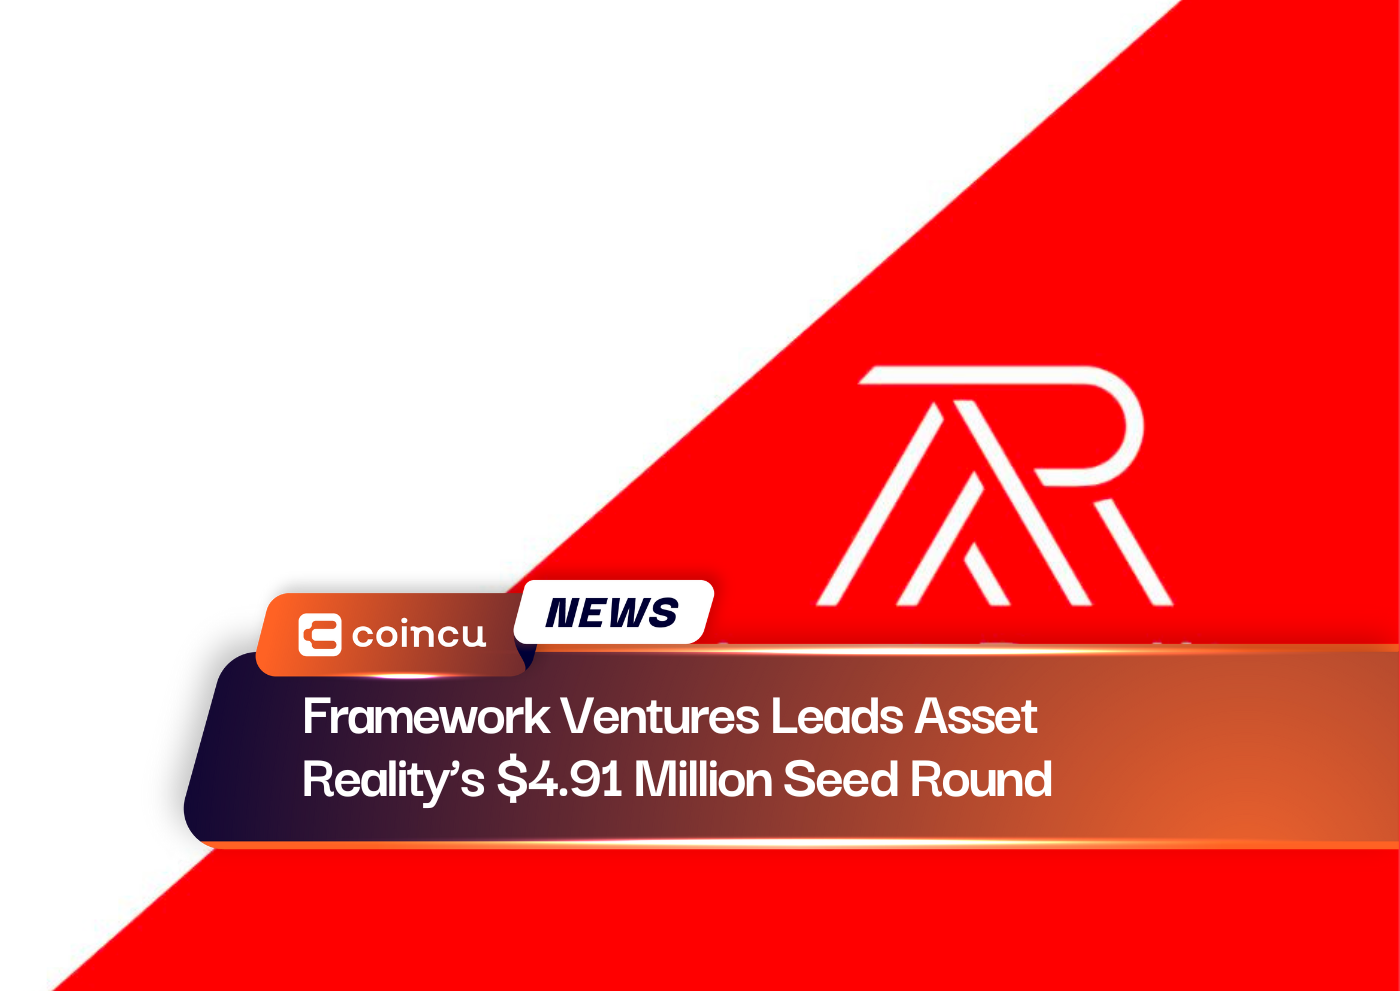 Framework Ventures Leads Asset Reality’s $4.91 Million Seed Round